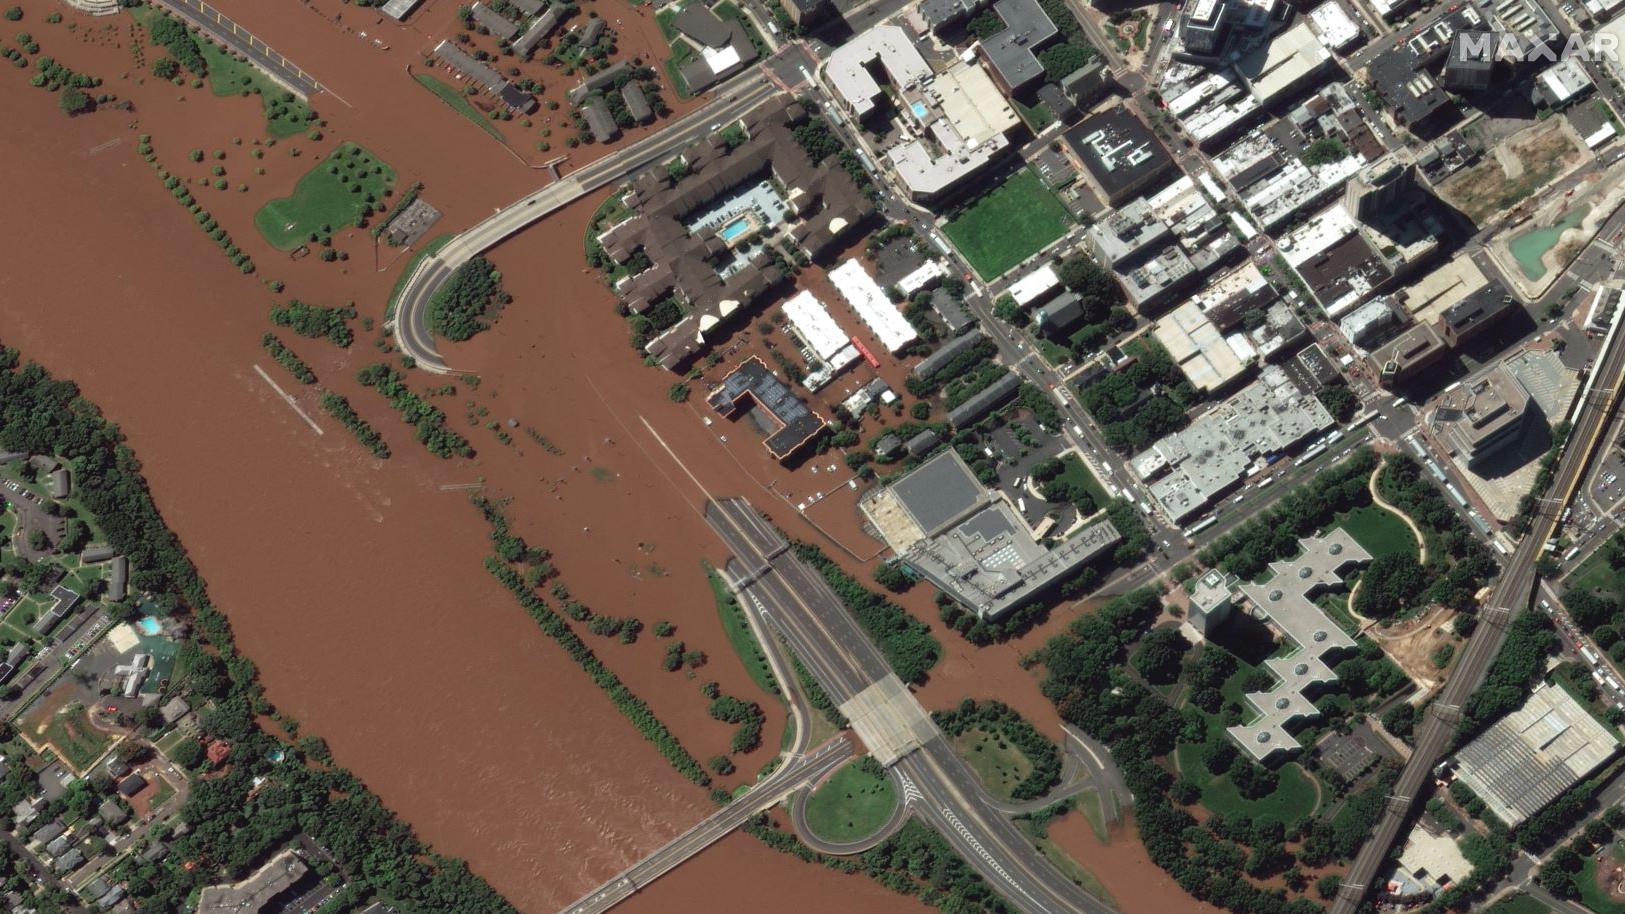 Satellite shots grunt impolite flooding in New Jersey within the aftermath of Hurricane Ida